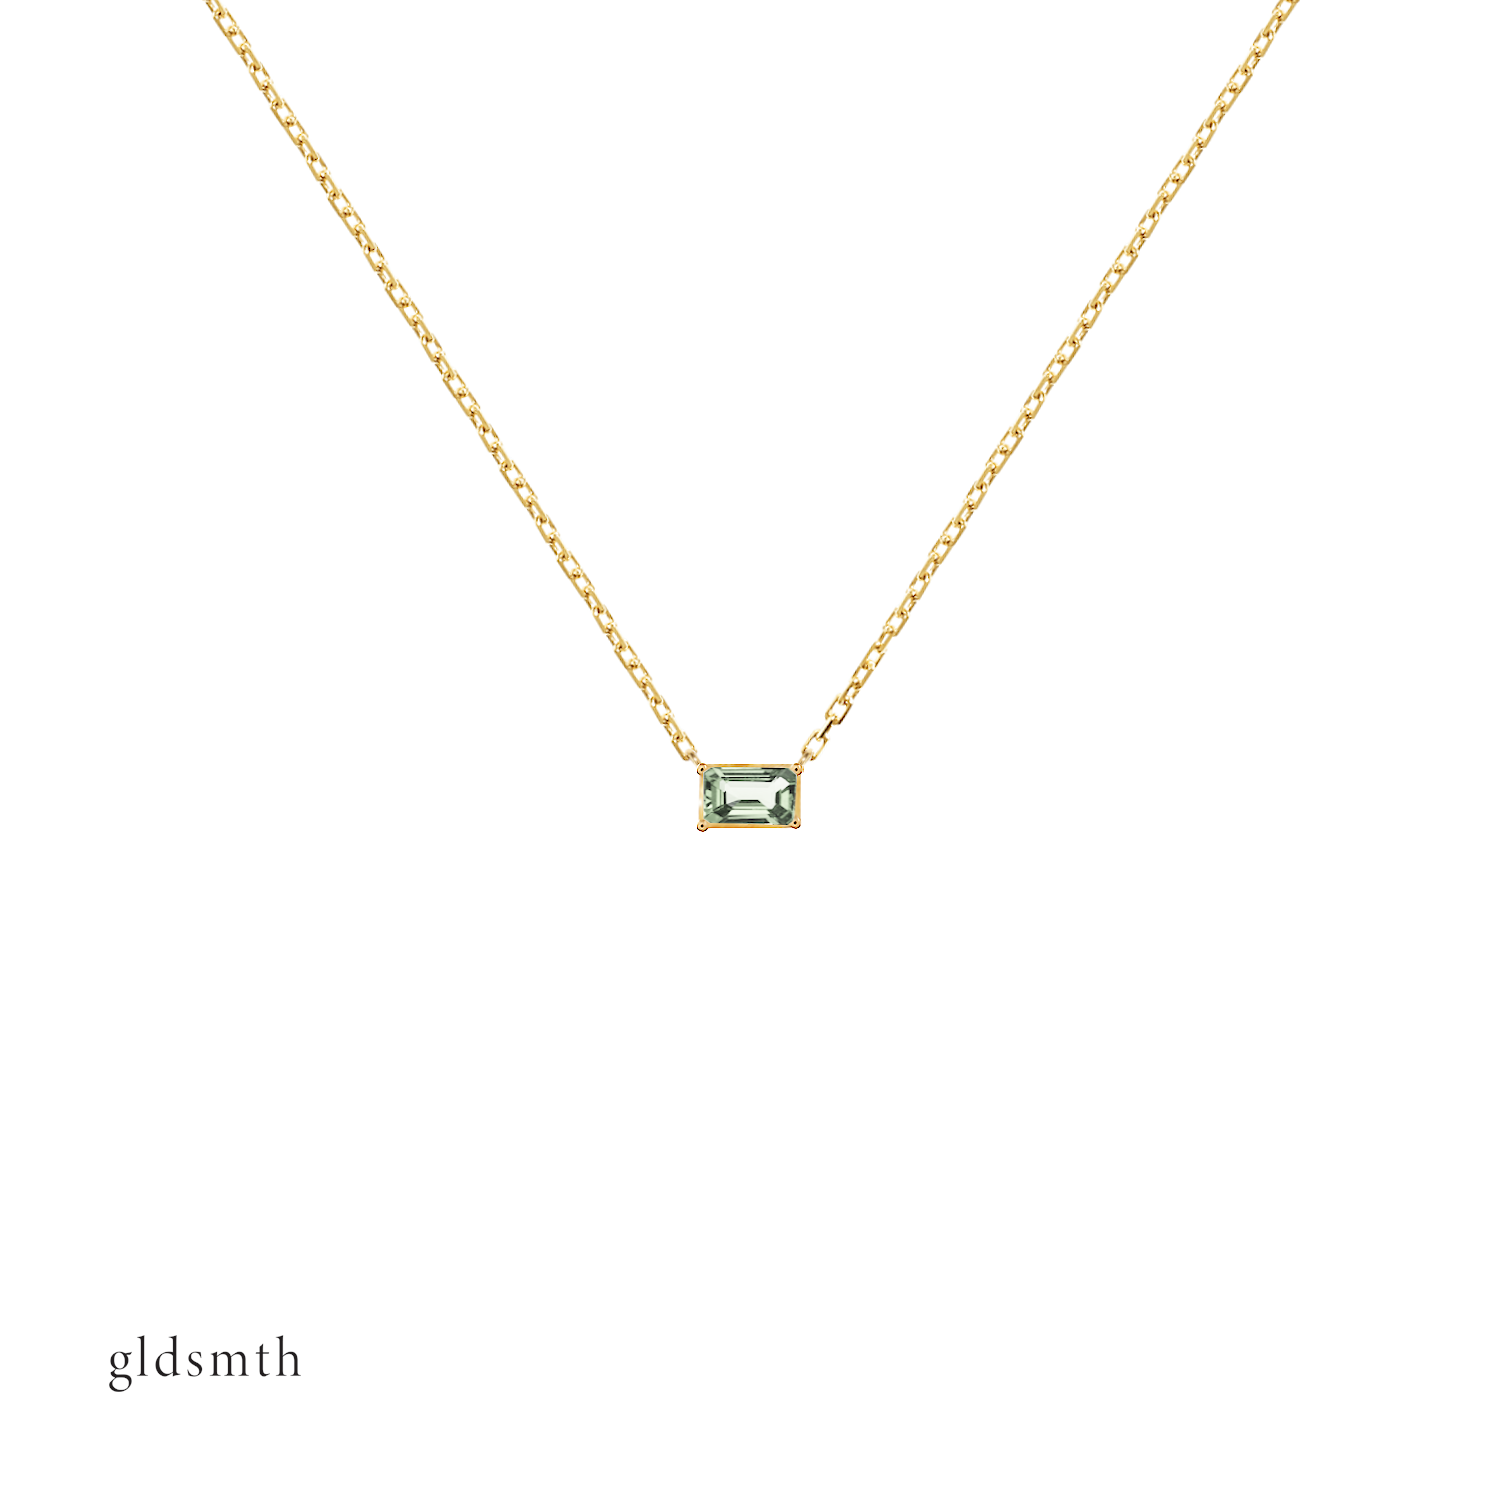 Precious and delicate hand crafted 10k solid gold necklace with peridot.